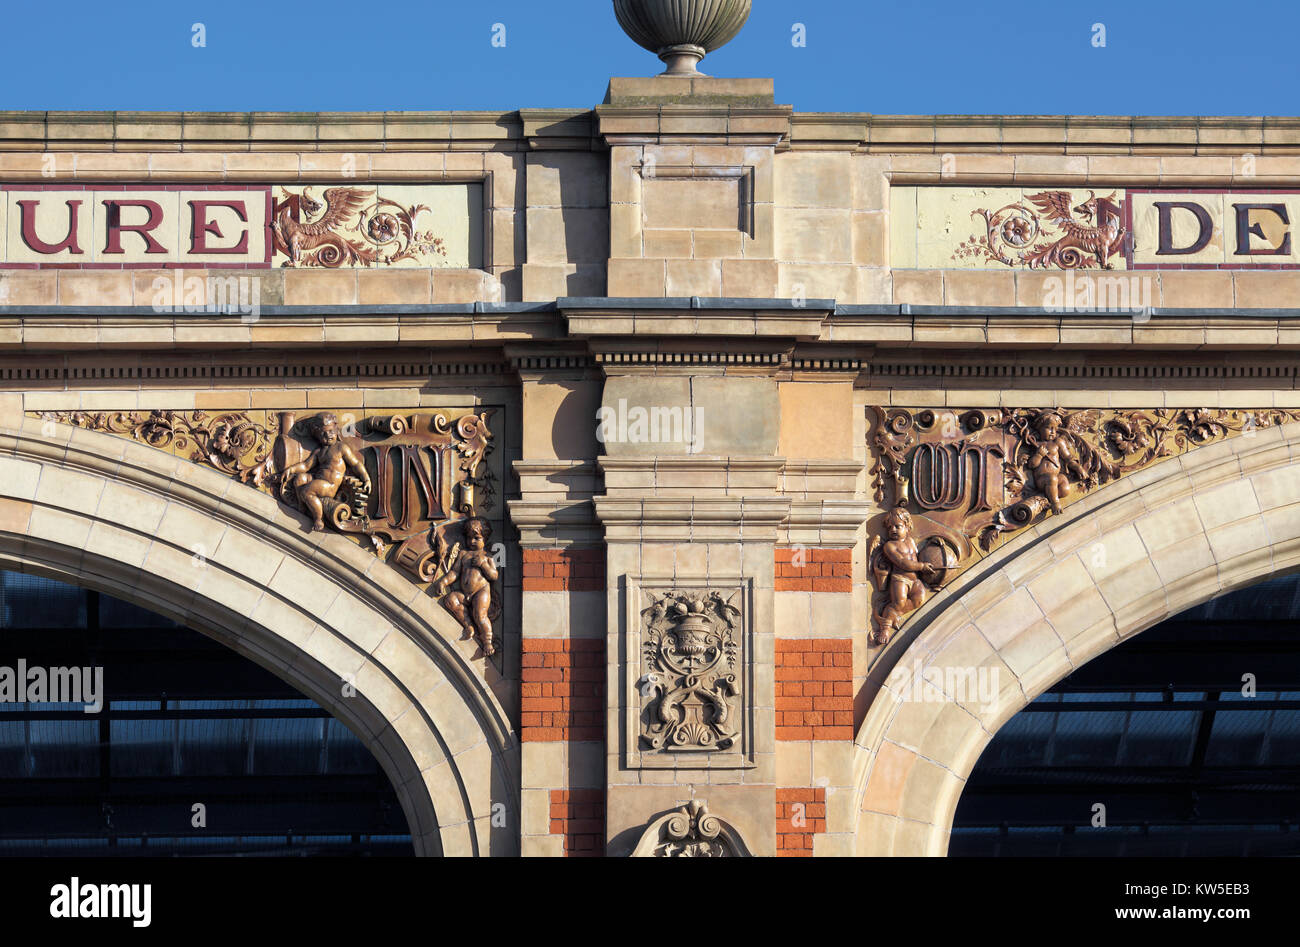 Ornate 'In' and 'Out' lettering in spandrels on the arched frontage of the late-Victorian (1892) London Road railway station, Leicester. Stock Photo